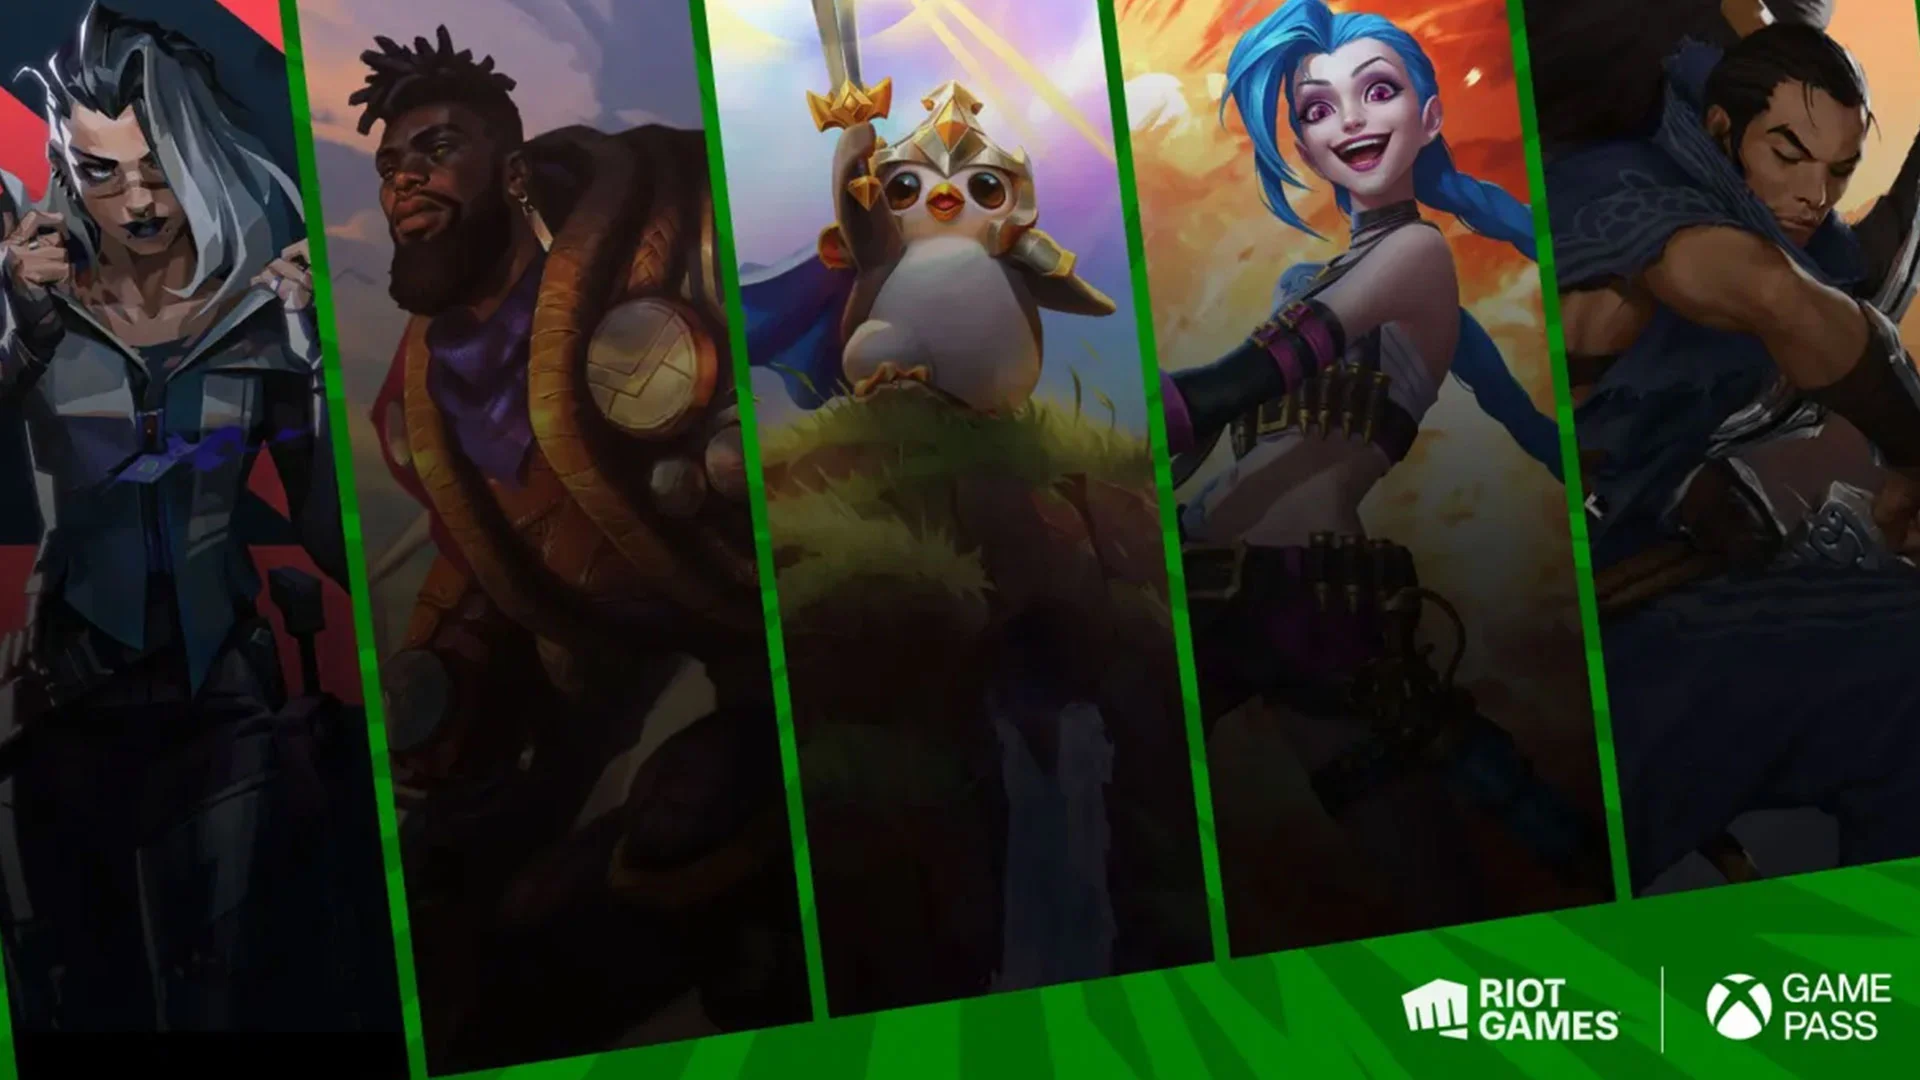 Xbox Game Pass Subscribers to Get Rewards for Popular Riot Games Titles